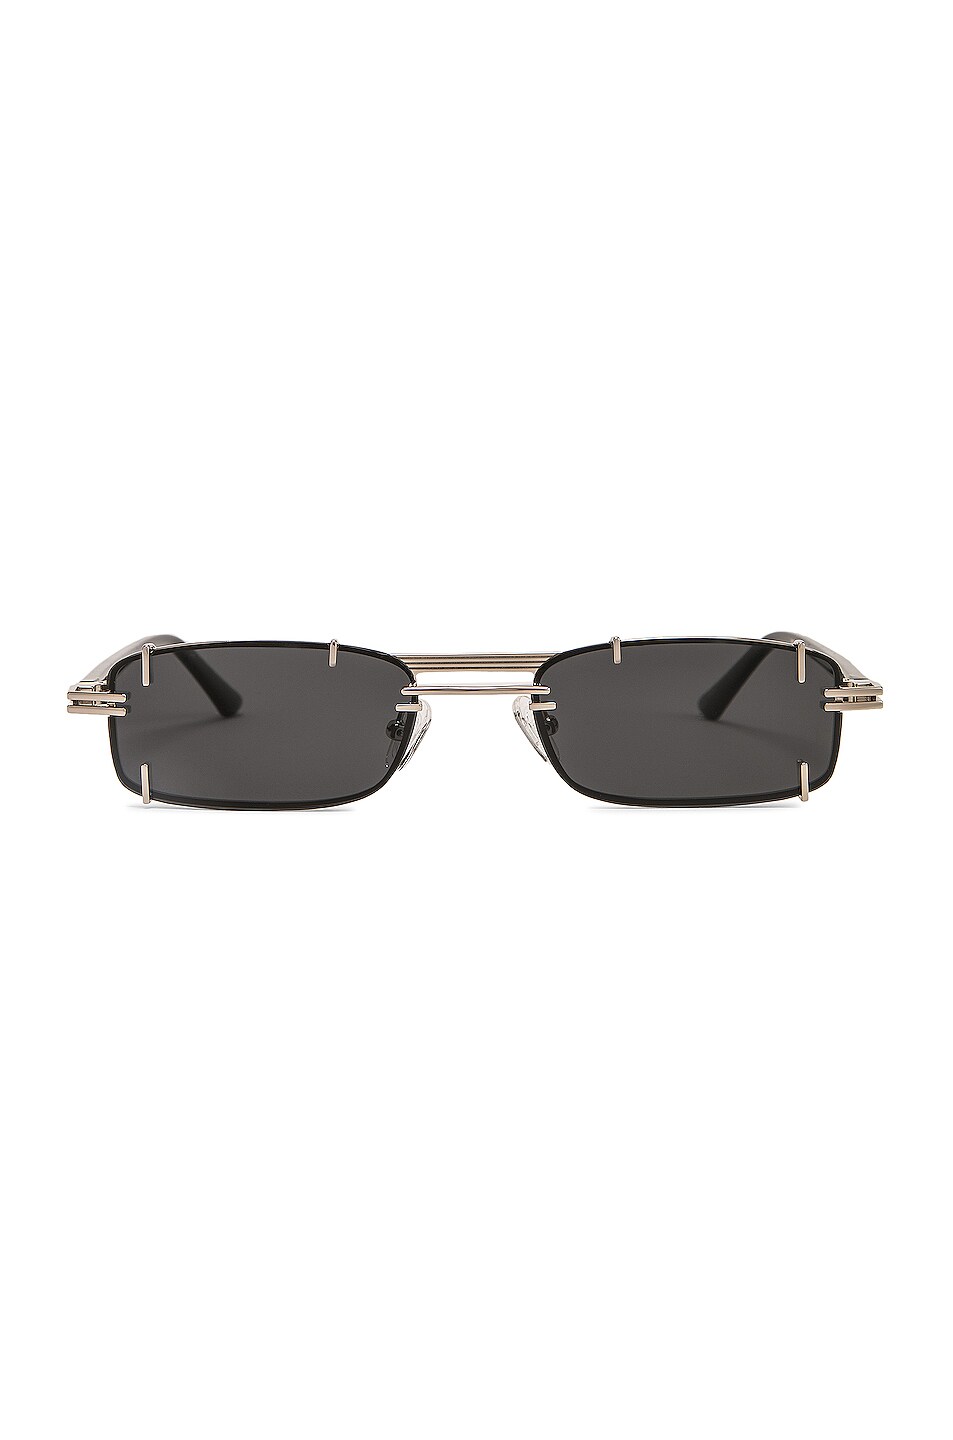 Image 1 of Y/Project Pronged Rectangular Sunglasses in Black, White Gold & Solid Grey